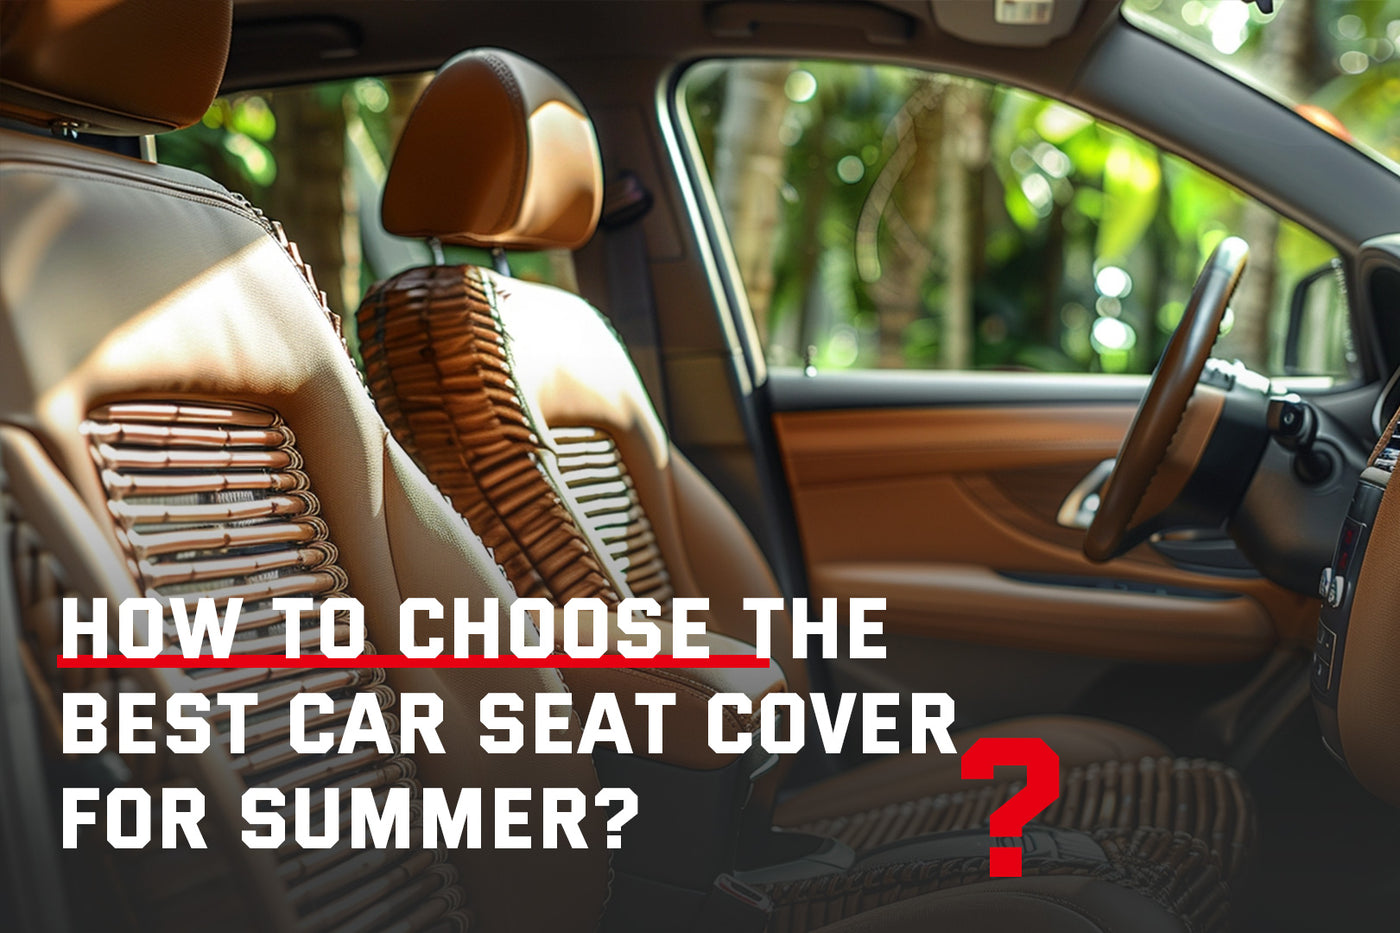 How To Choose the Best Car Seat Cover for Summer?